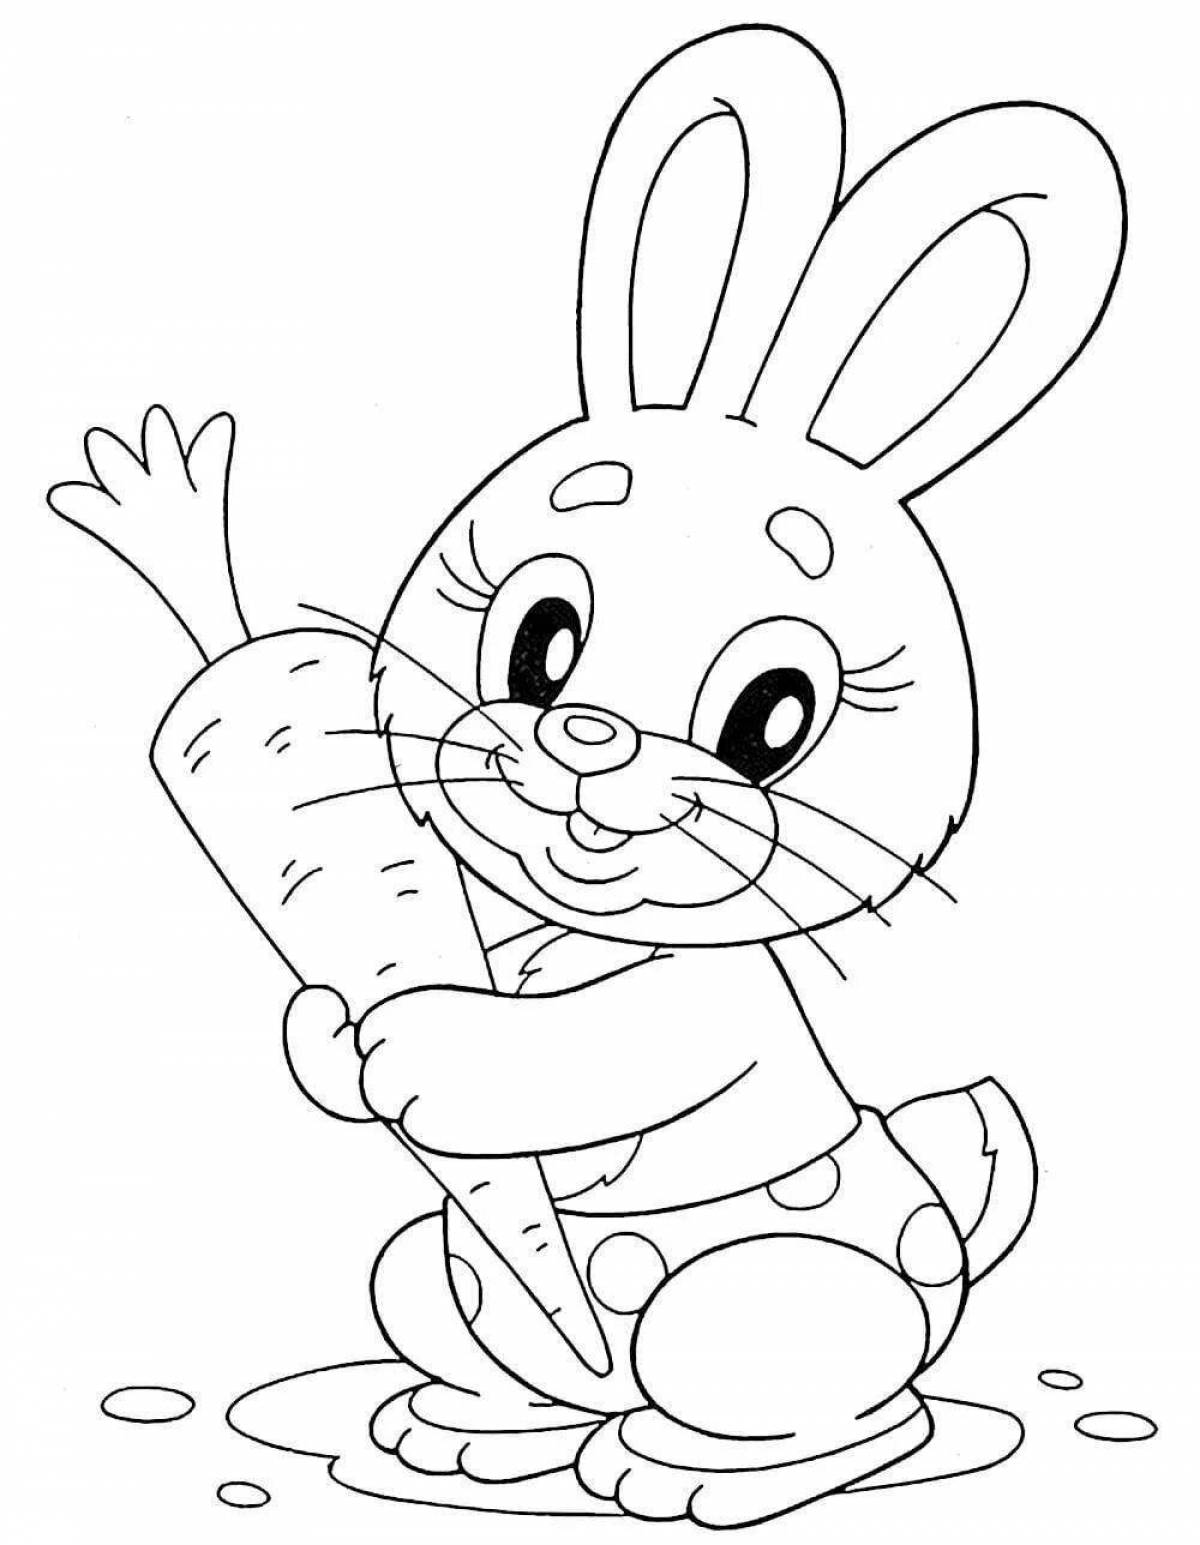 Bright coloring drawing of a hare for children